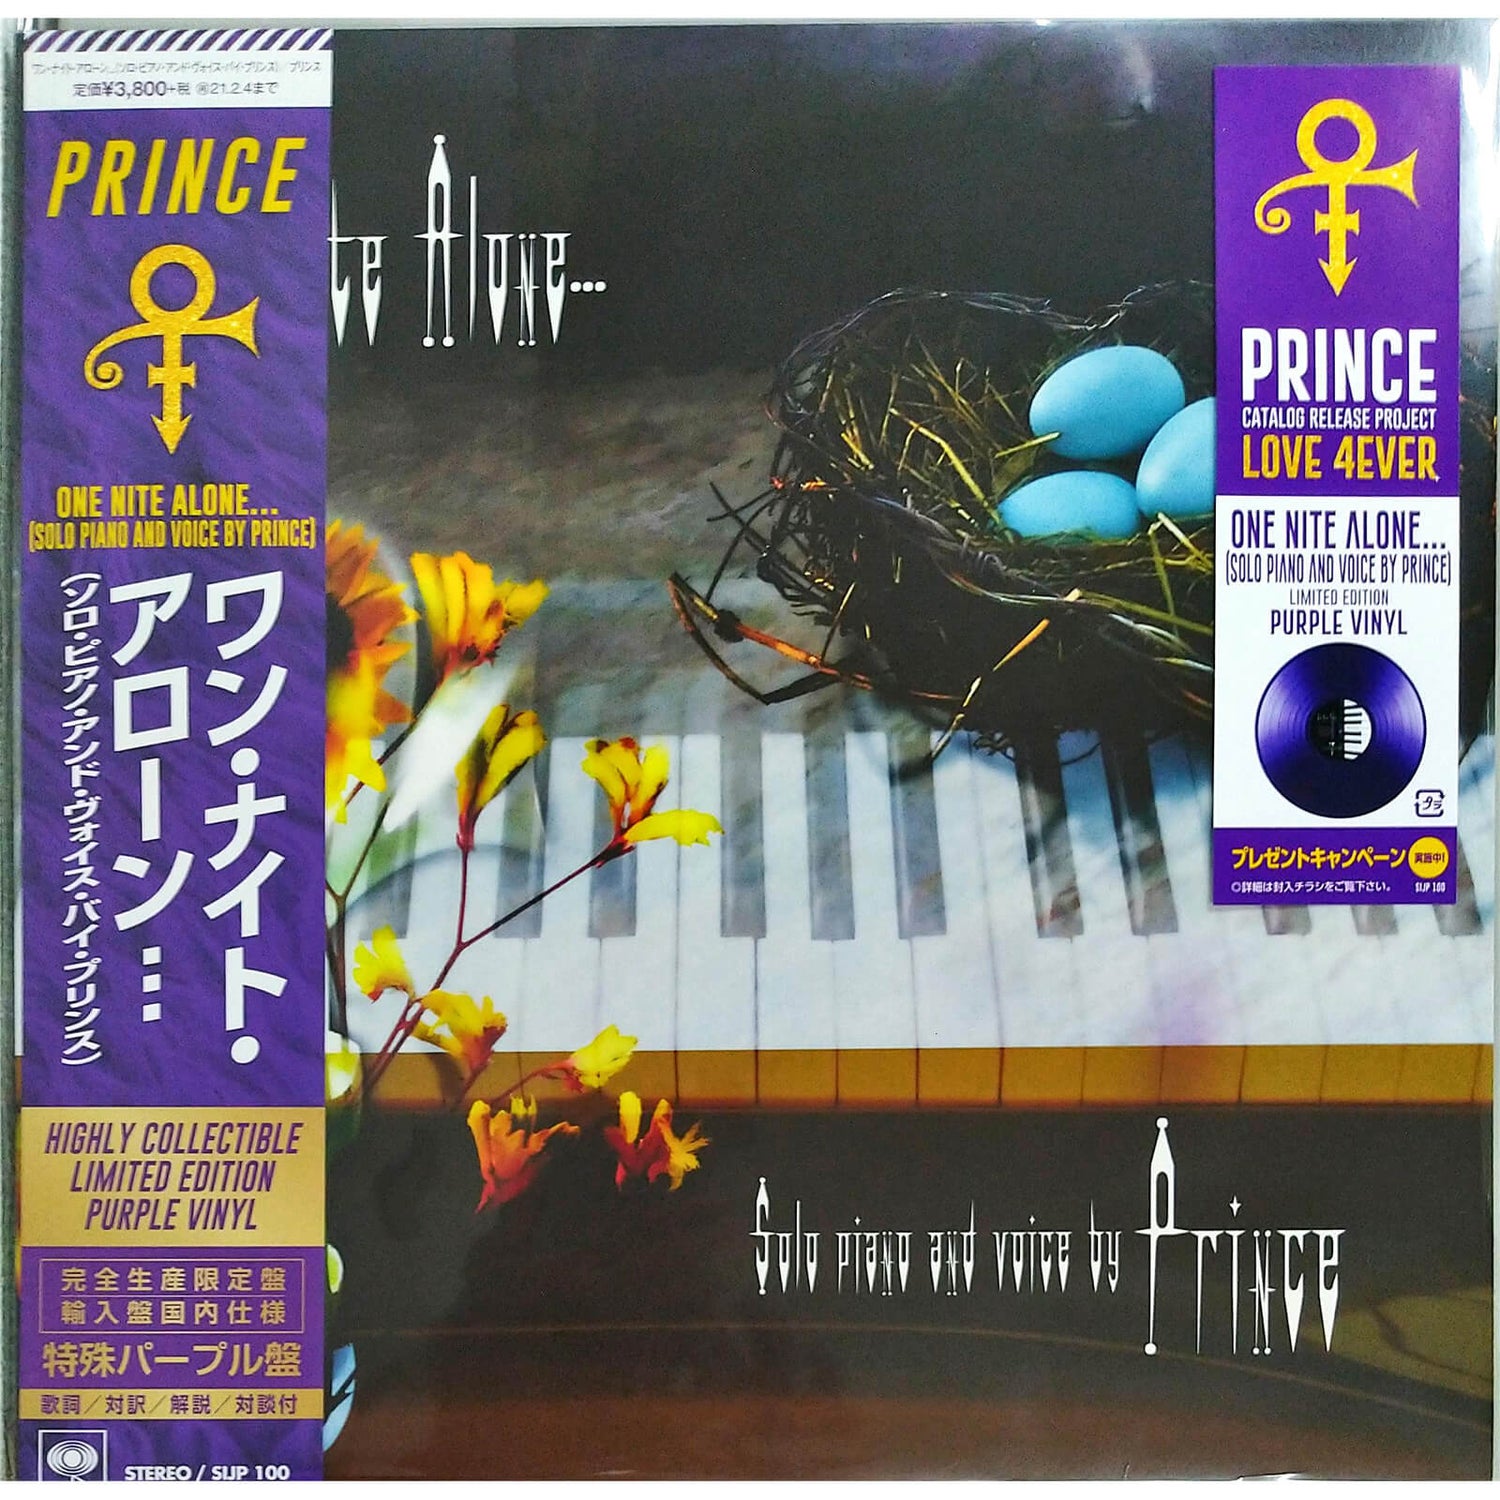 Prince - One Nite Alone... (Solo Piano And Voice By Prince) Vinyl Japanese Edition